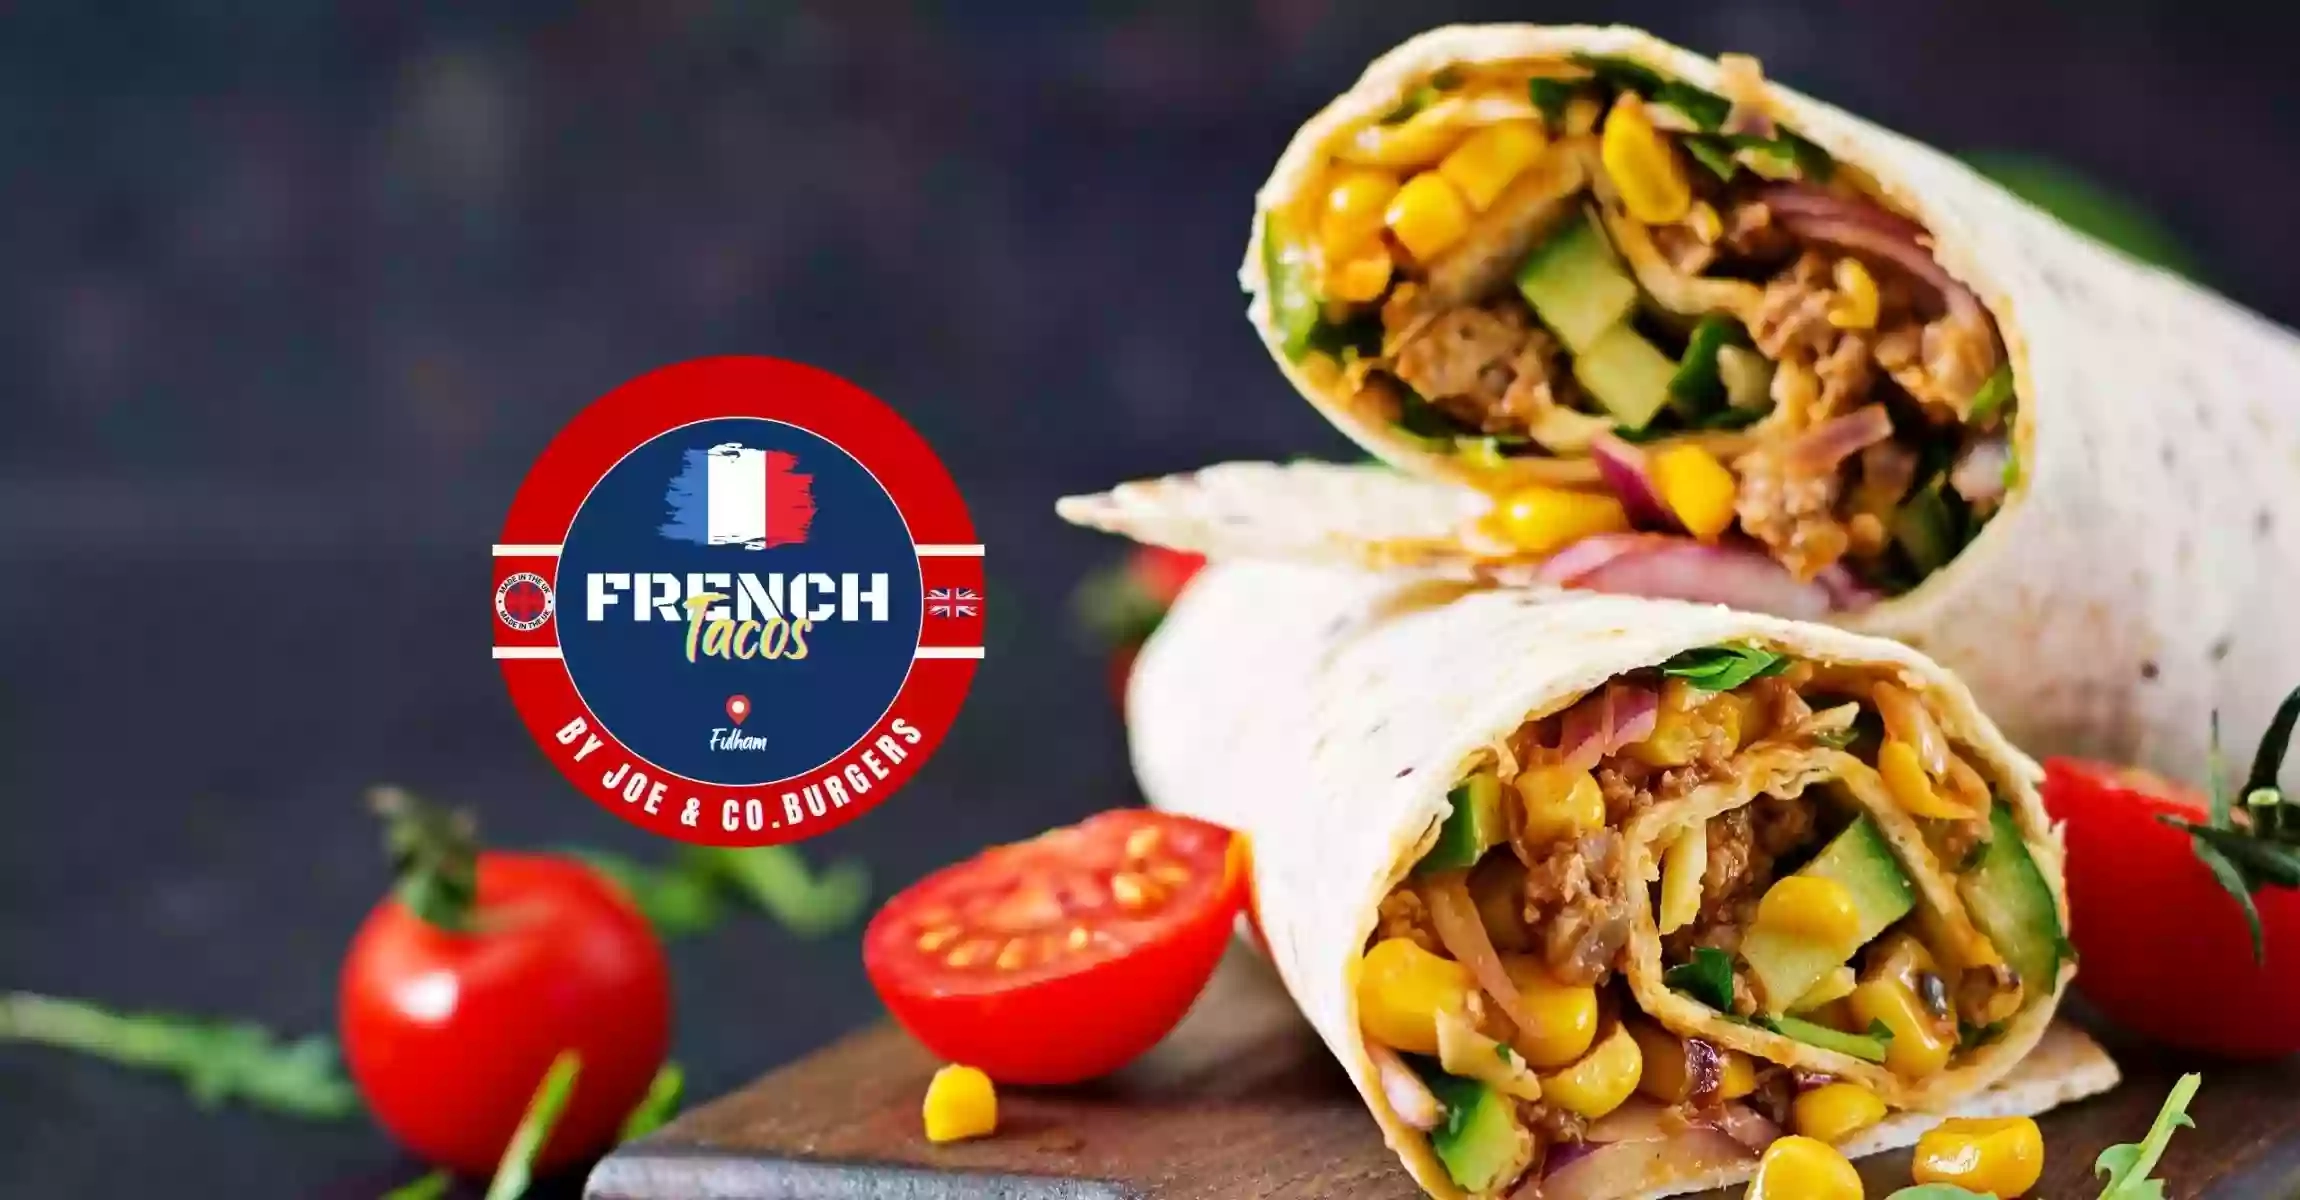 French Tacos By Joe & Co